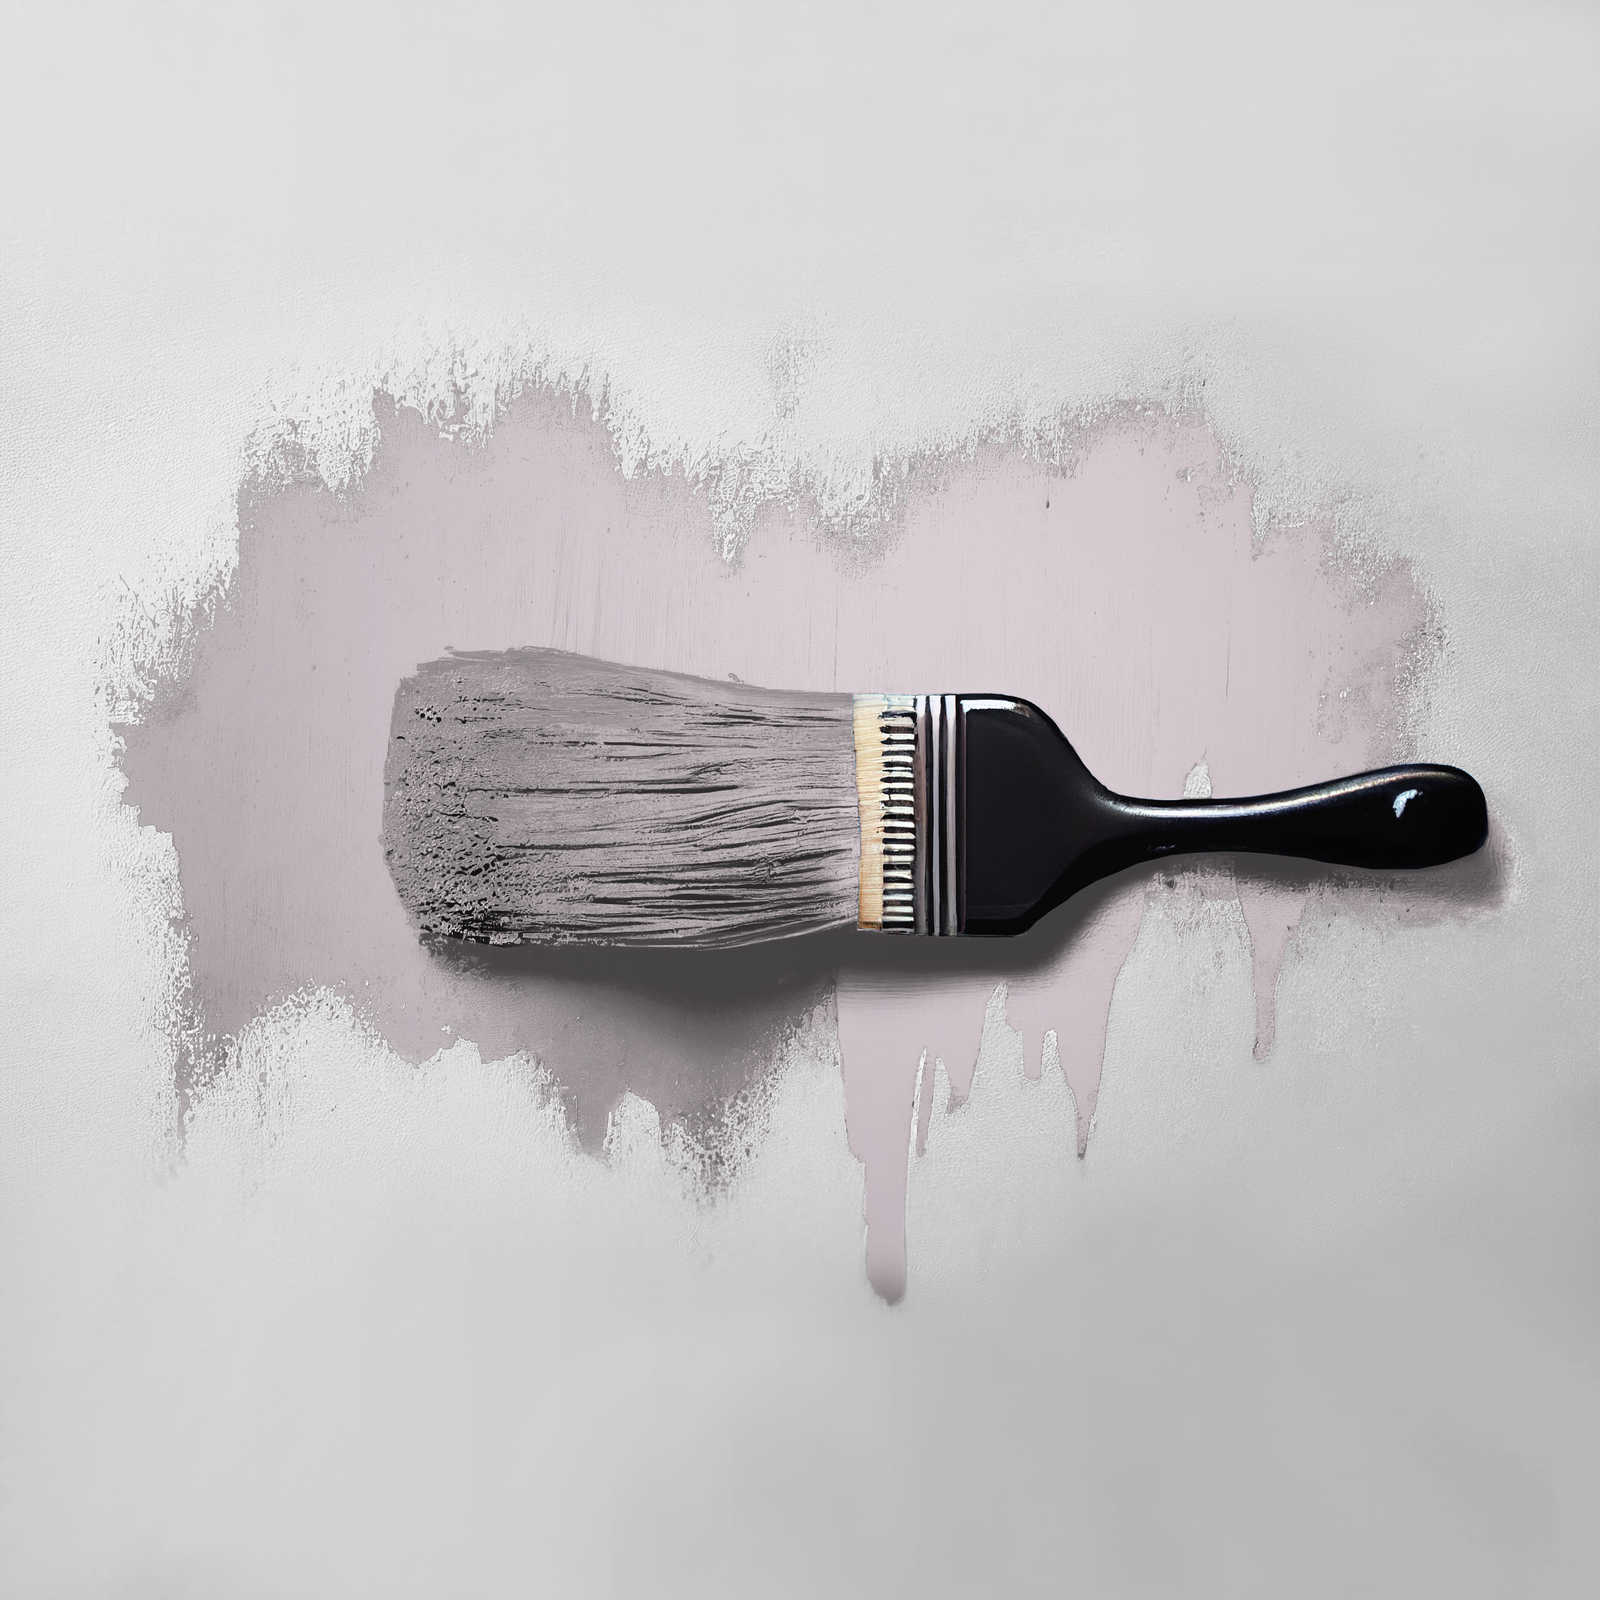             Wall Paint TCK2004 »Leafy Lavender« in cool lavender shade – 2.5 litre
        